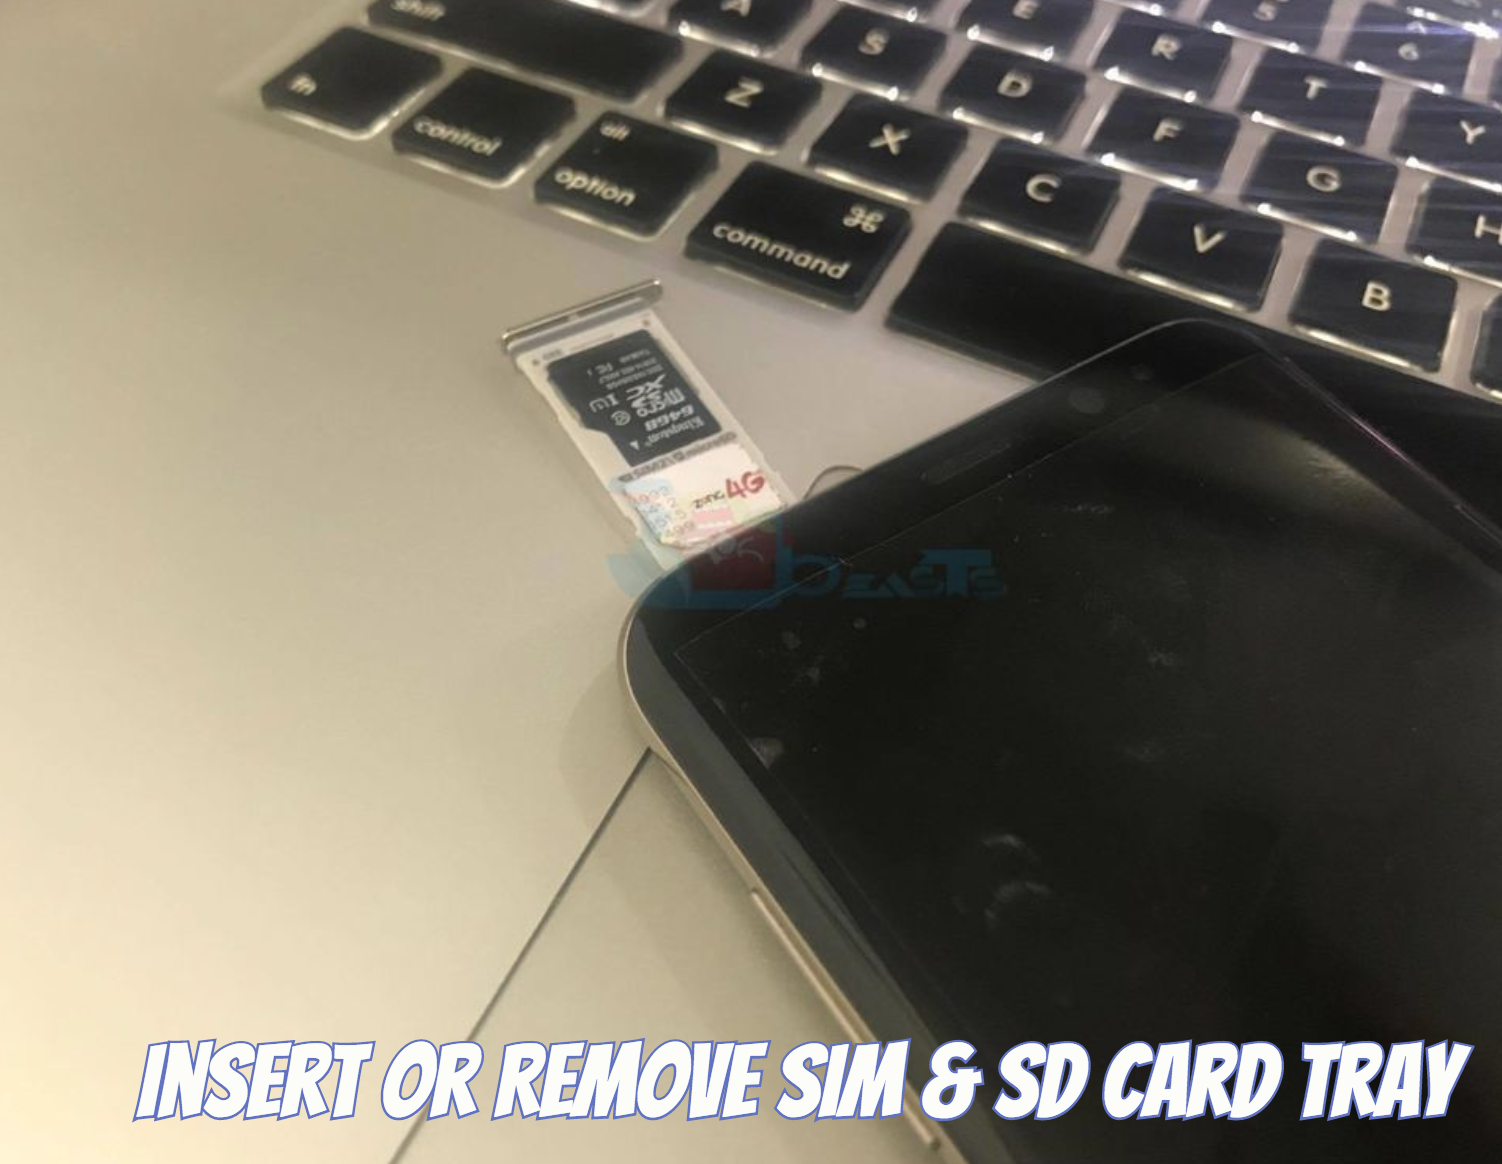 Galaxy S7/S8/Note 8: Insert or Remove SIM & SD Card Tray